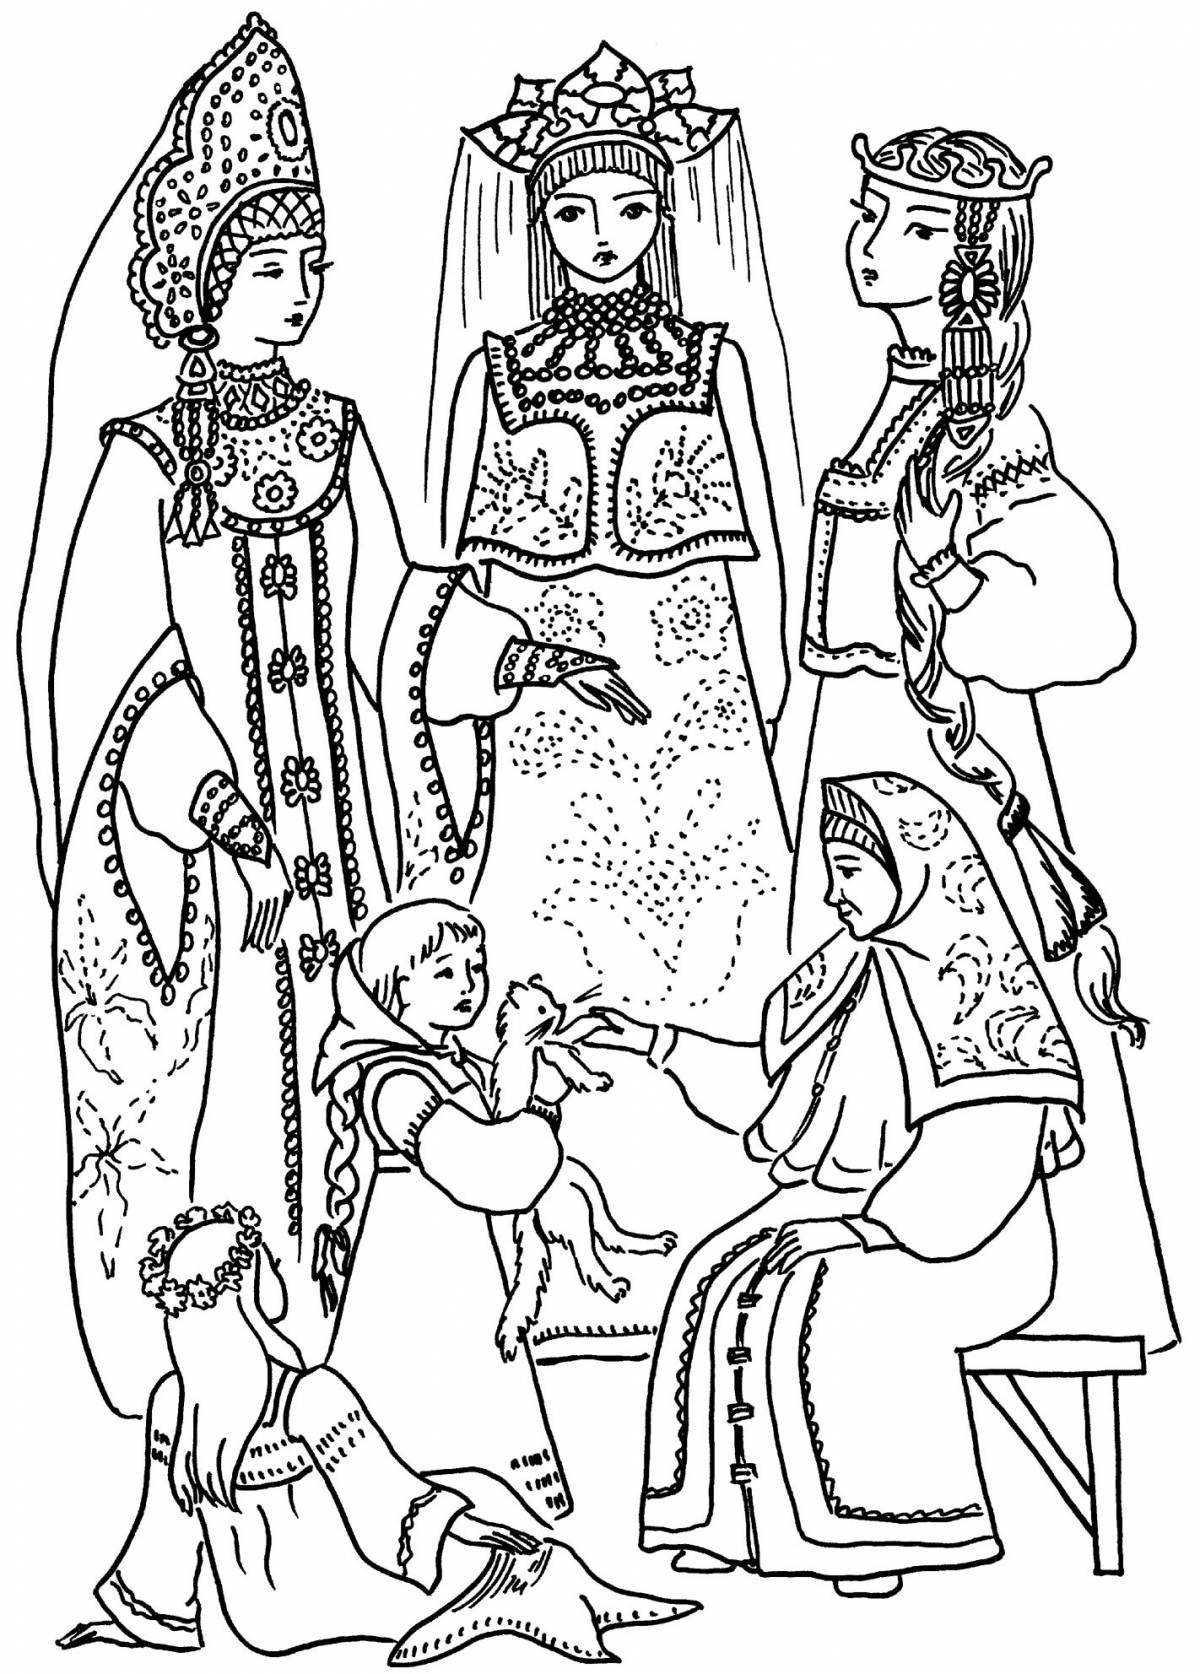 Charming Russian folk clothes coloring pages for kids